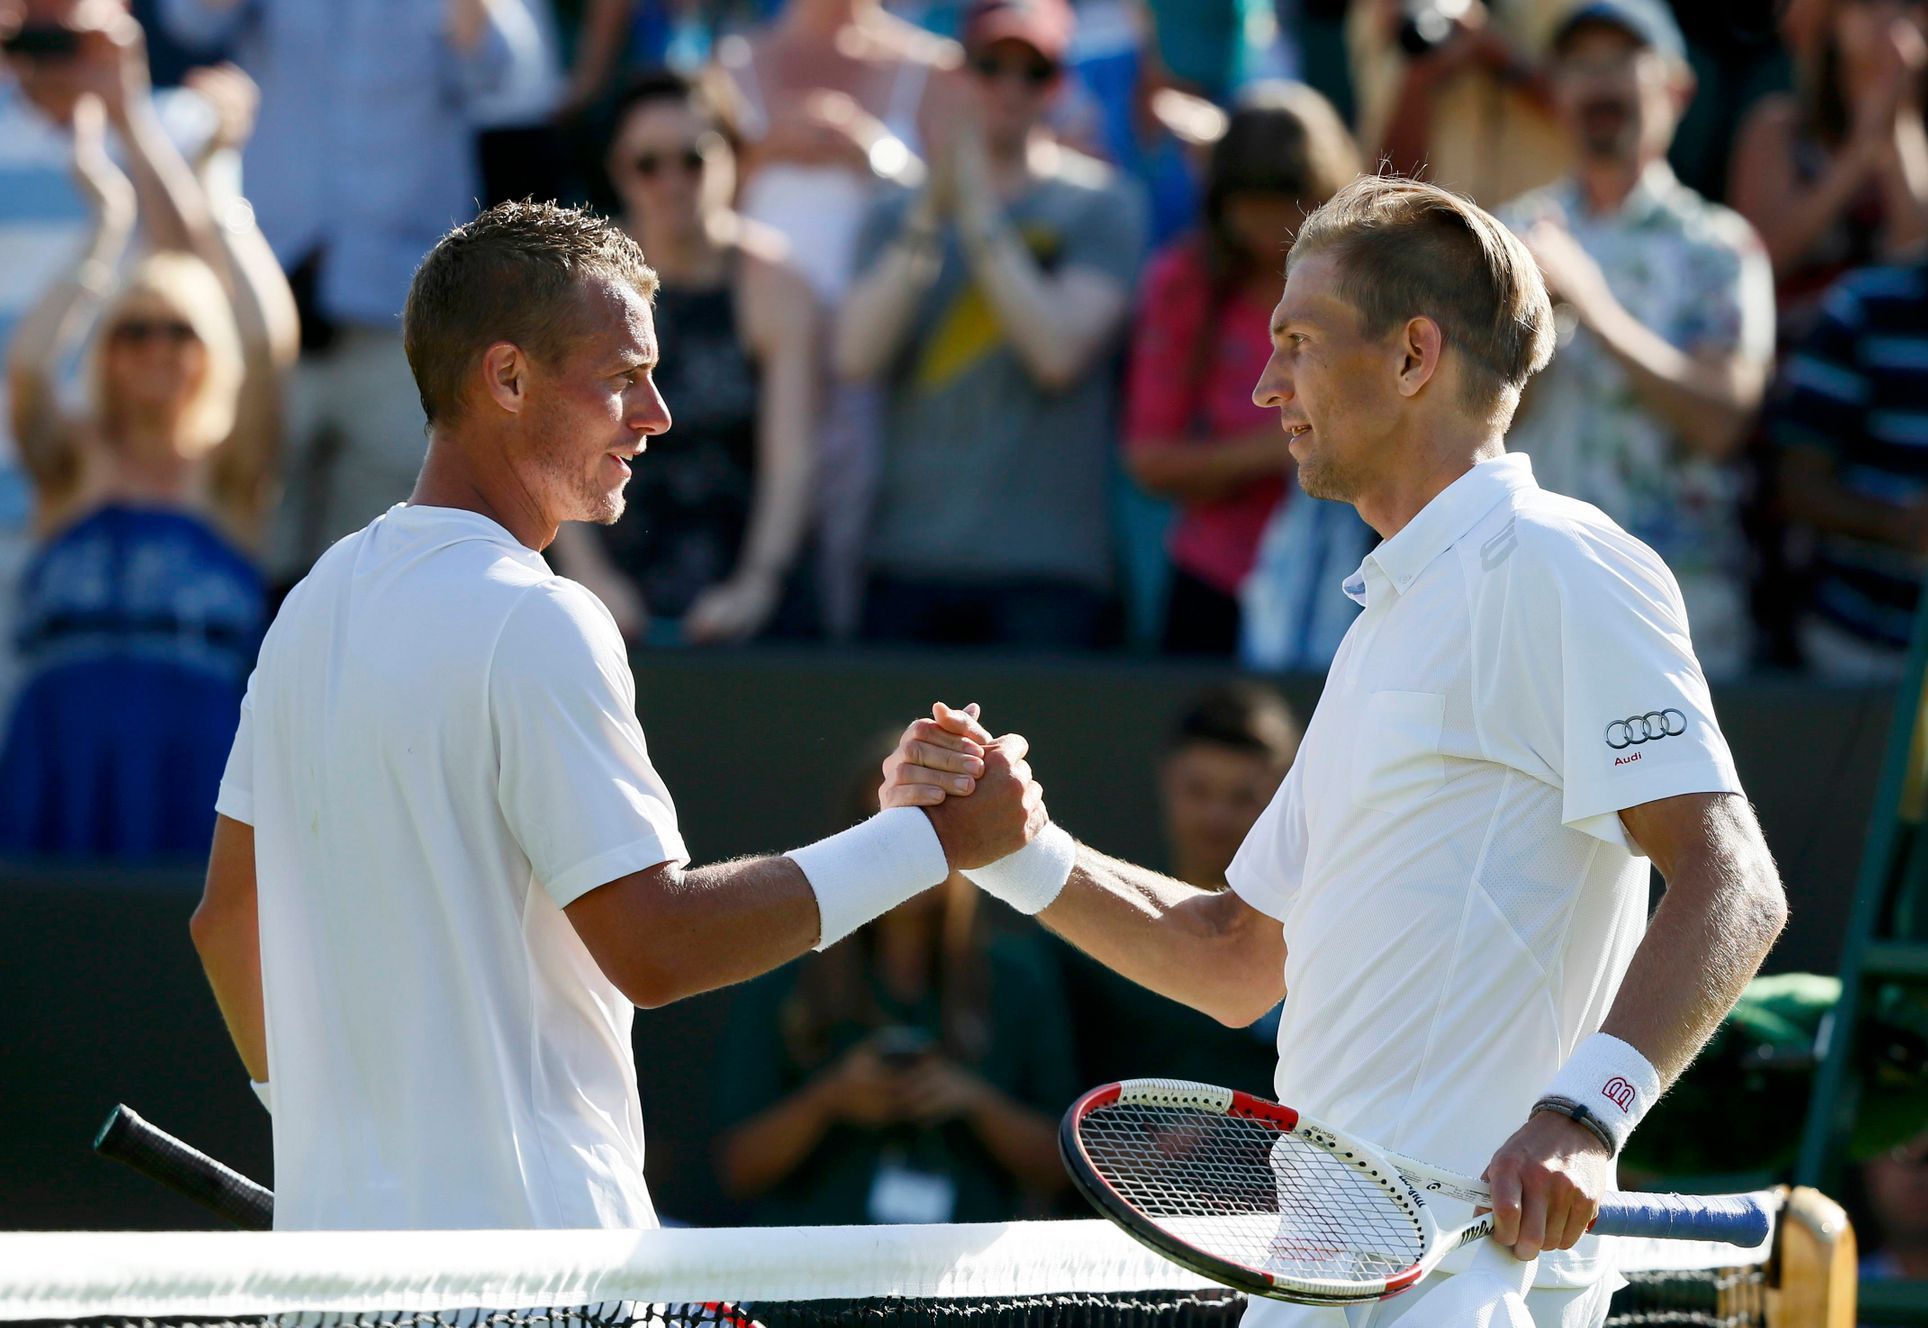 Jarkko Nieminen of Finland shakes hands with Lleyton Hewitt of Australia after winning their match at the Wimbledon Tennis Championships in London